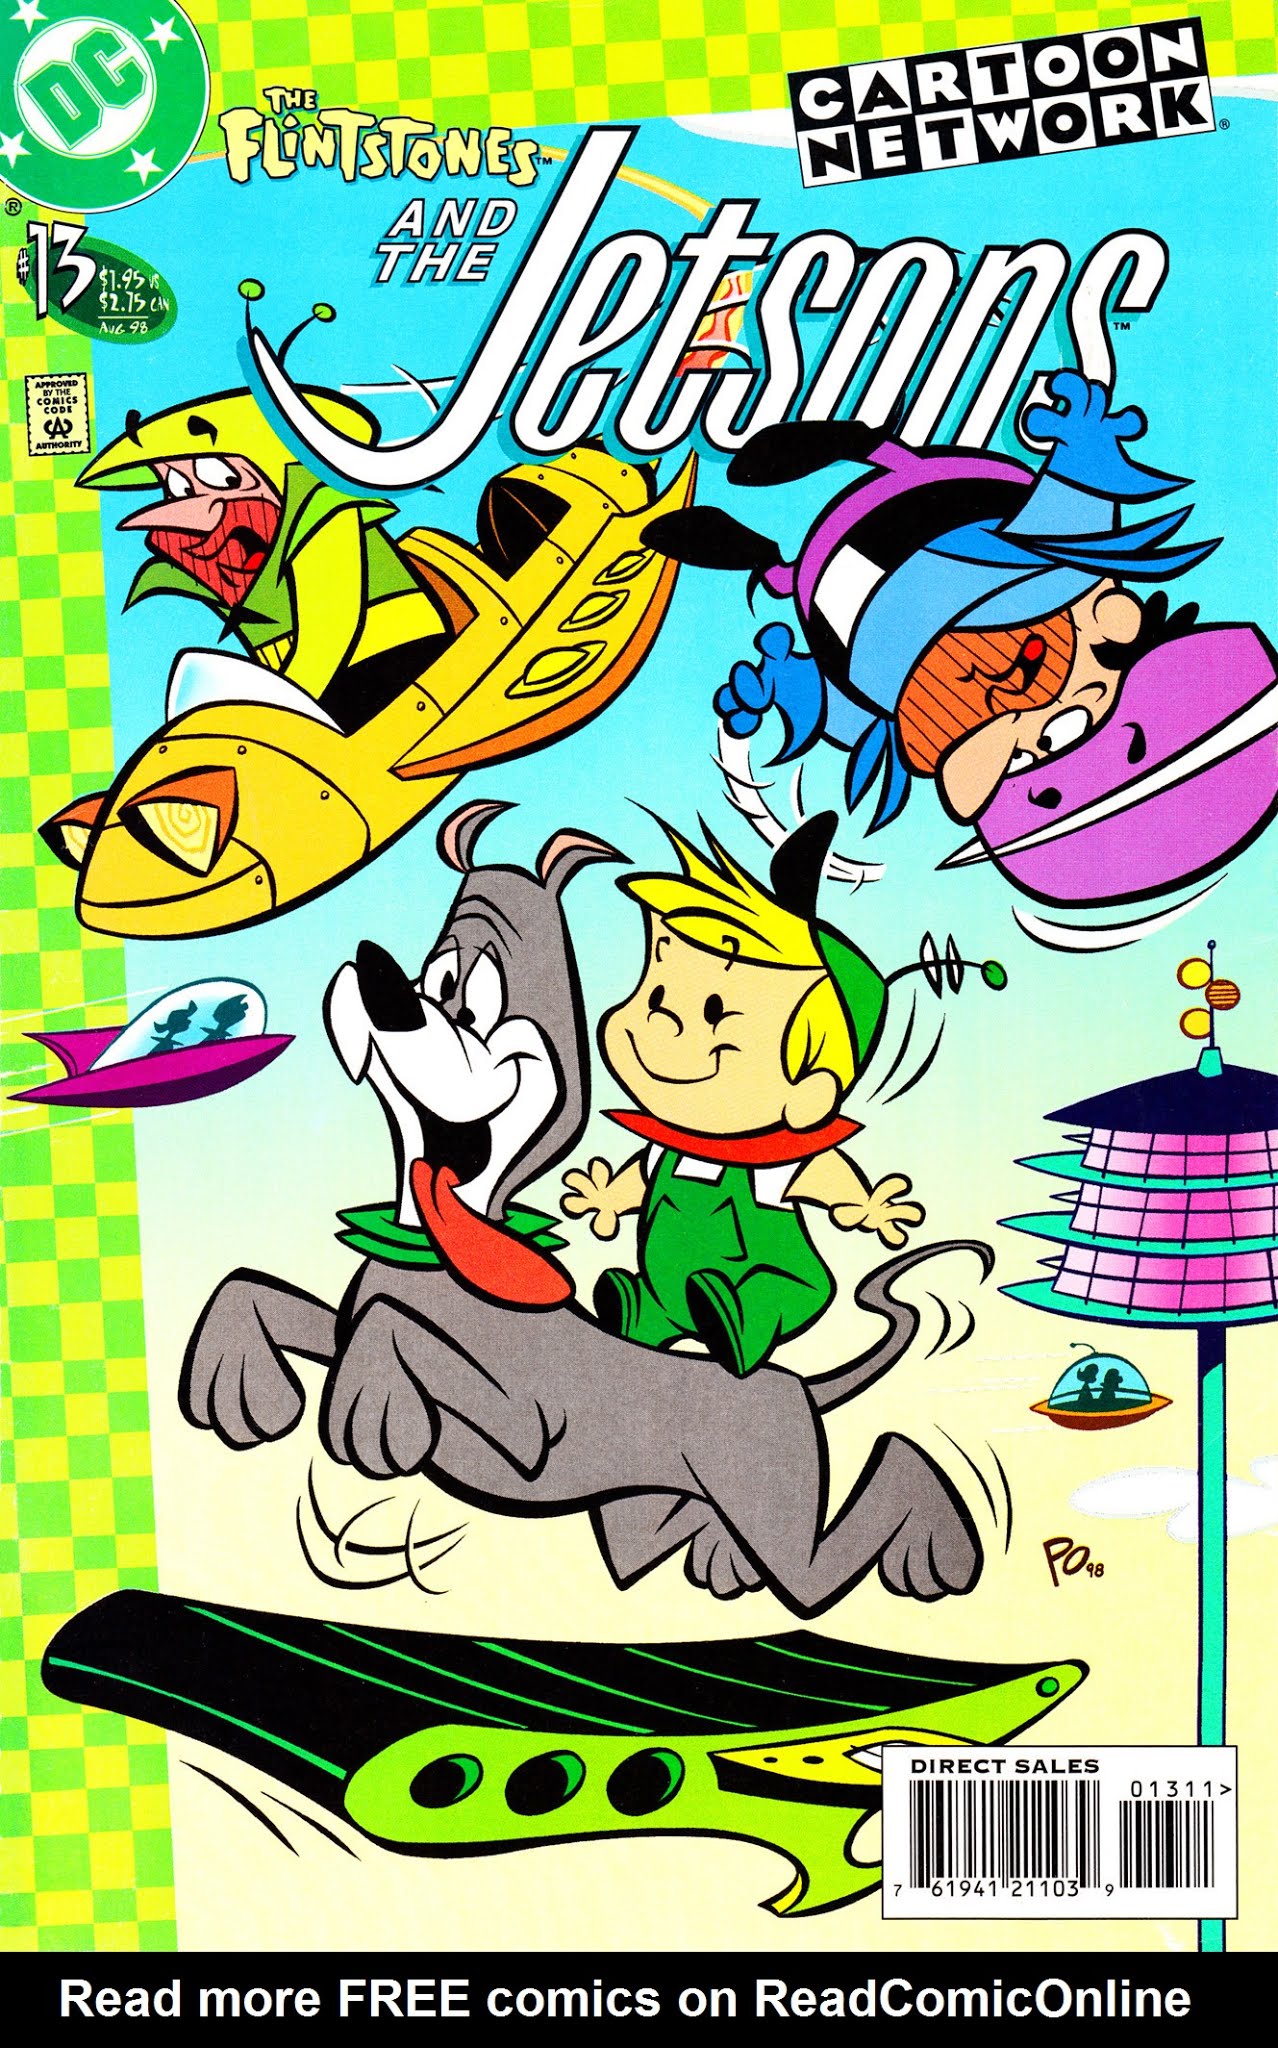 Read online The Flintstones and the Jetsons comic -  Issue #13 - 1